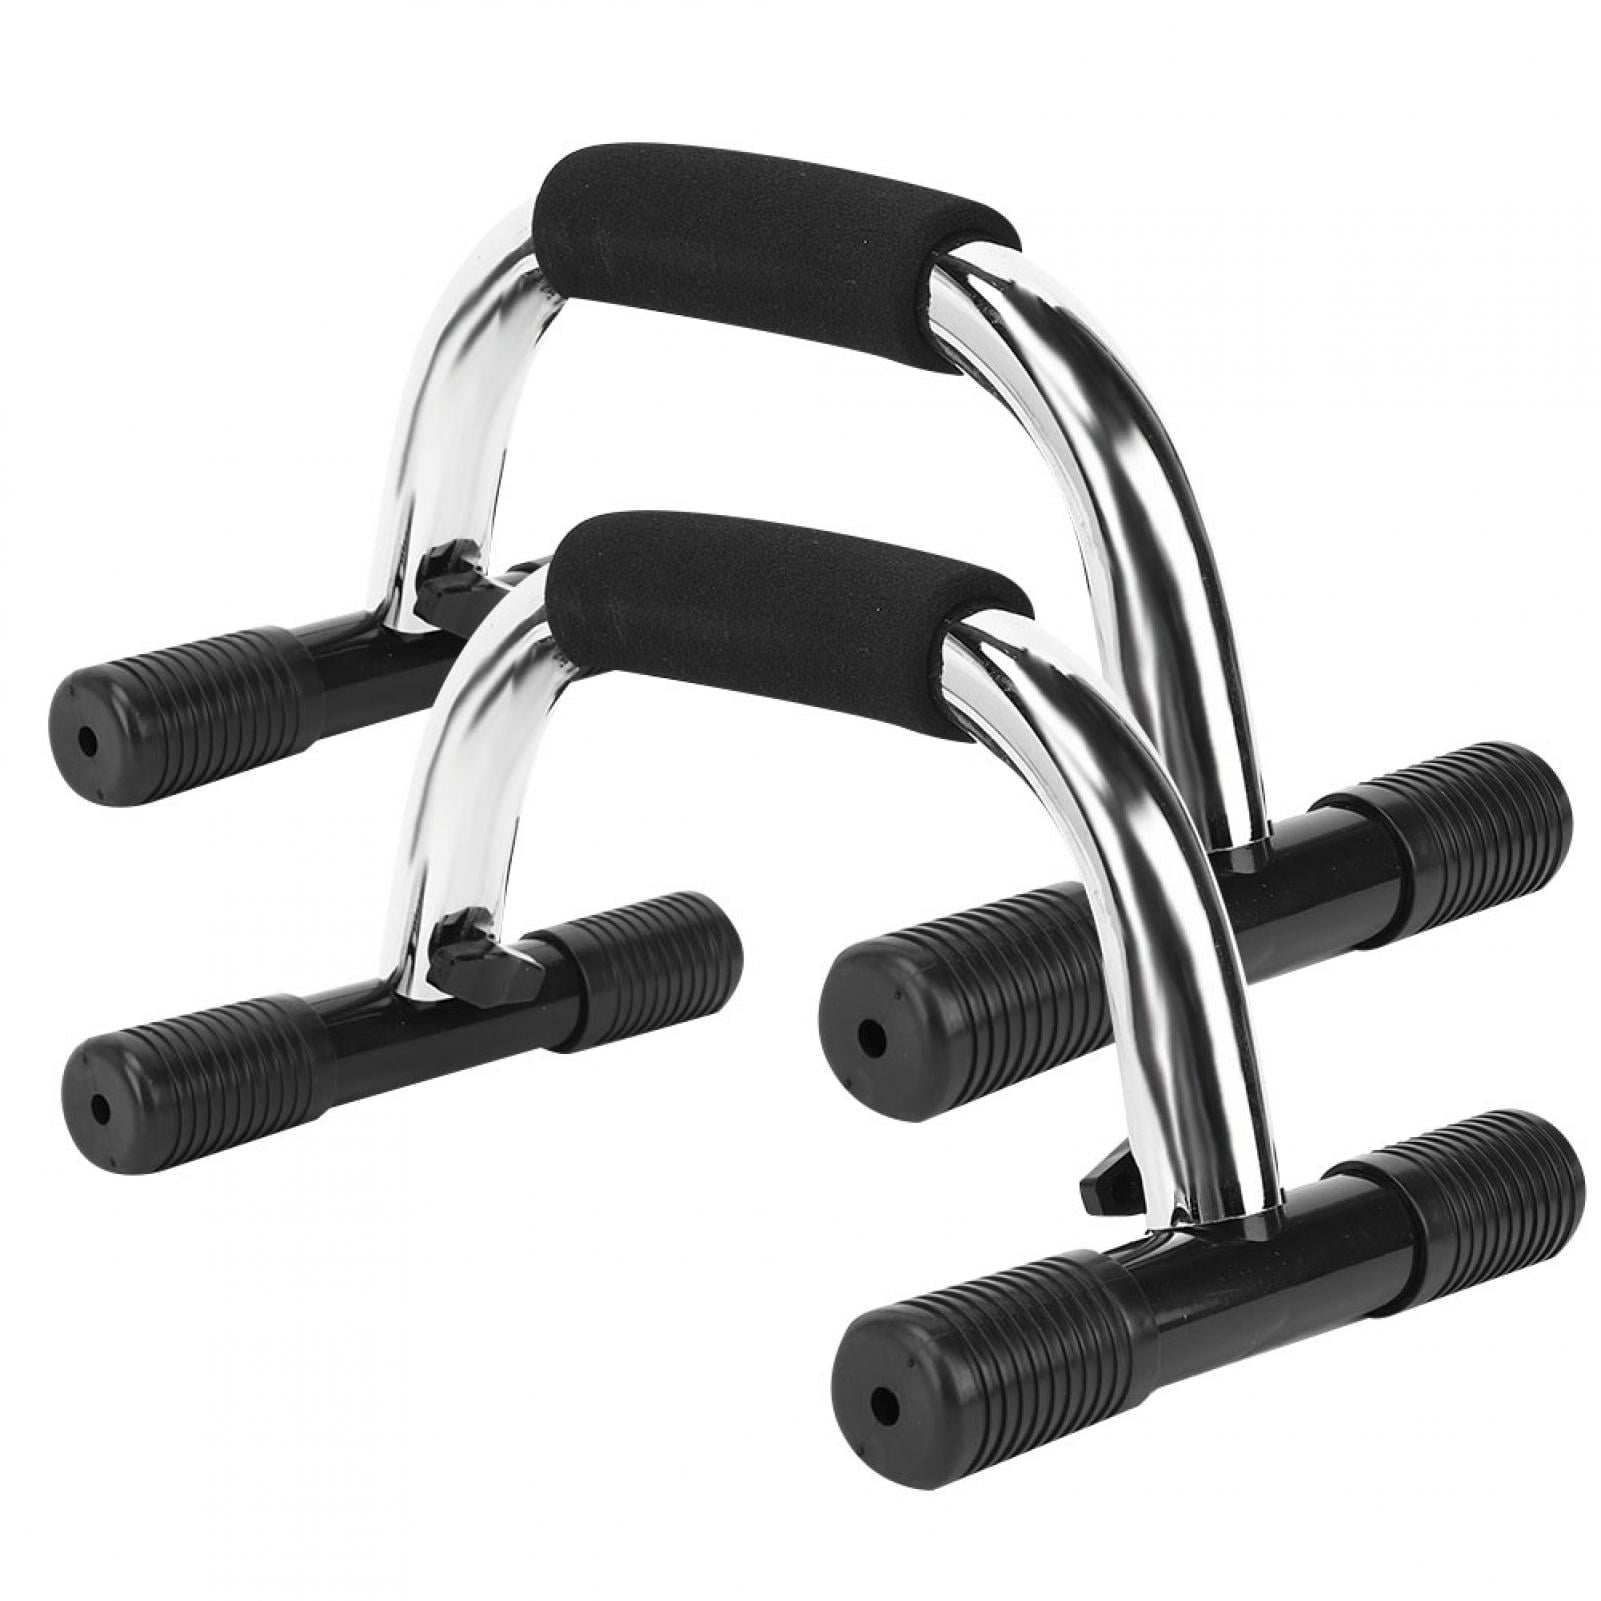 Details about   1 Pair Steel Push up Bars Chest Muscle Pushup Stands with Foam Grips Black 